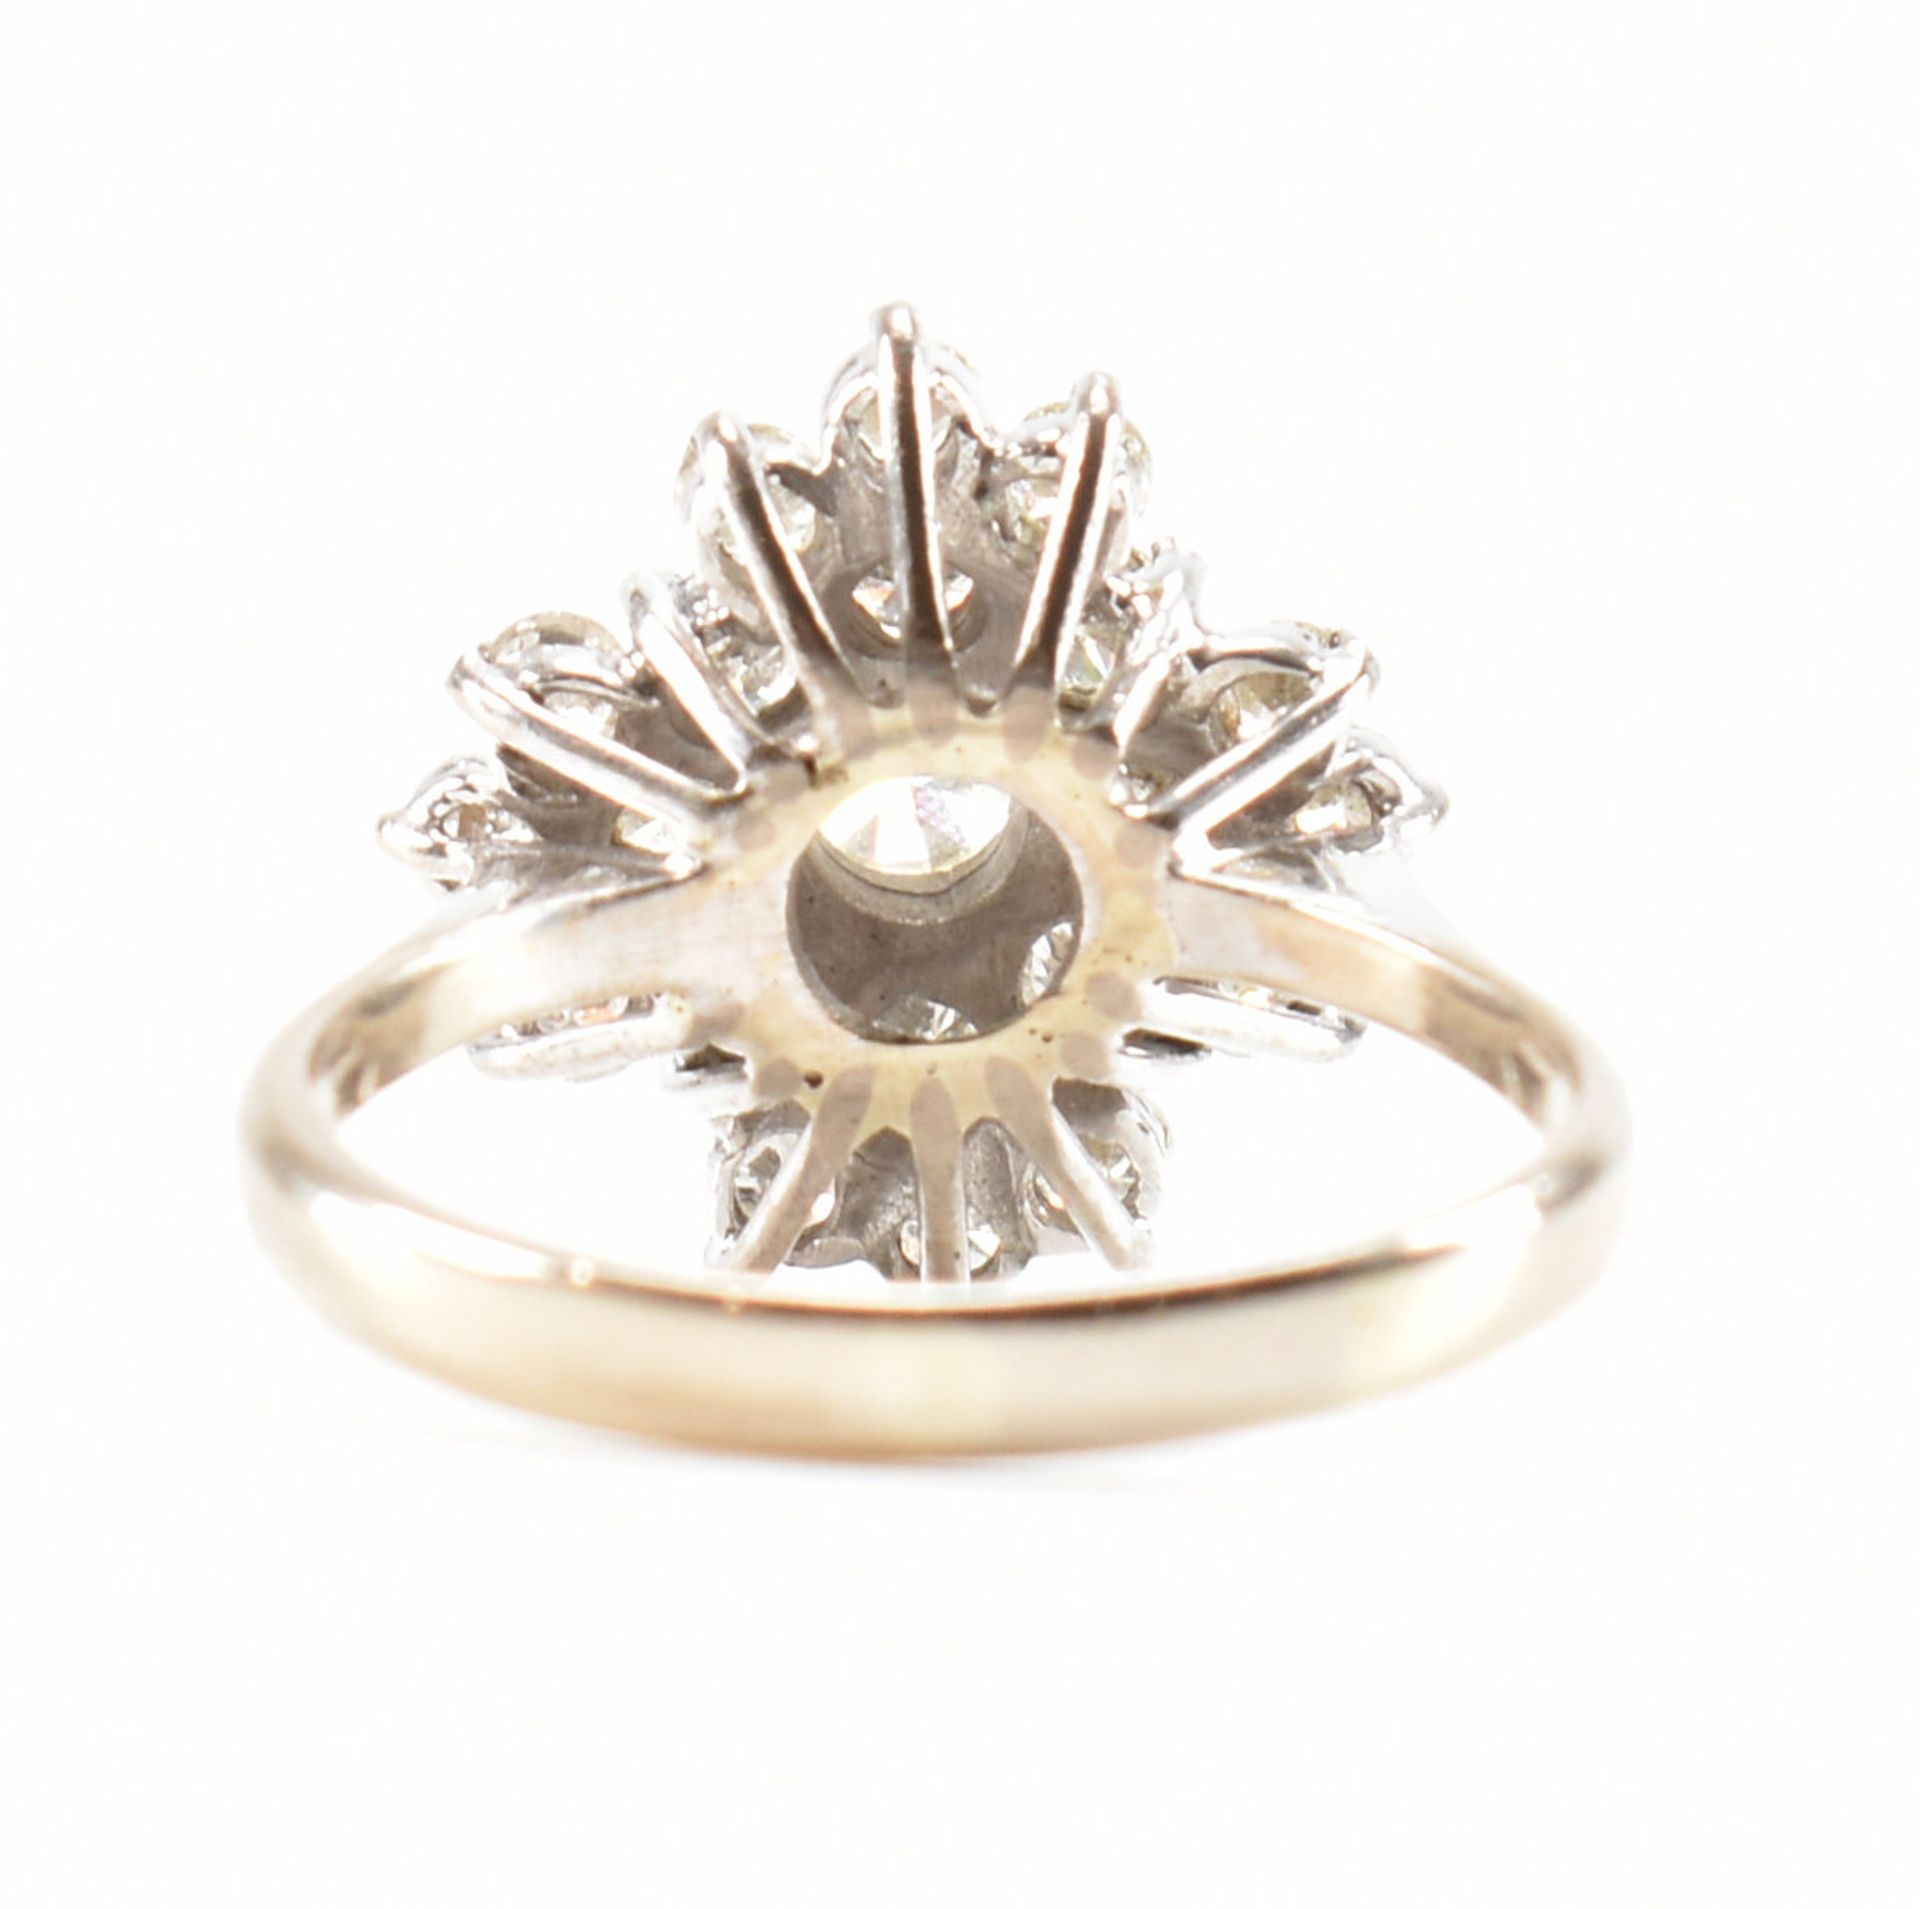 HALLMARKED 18CT GOLD & DIAMOND CLUSTER RING - Image 4 of 9